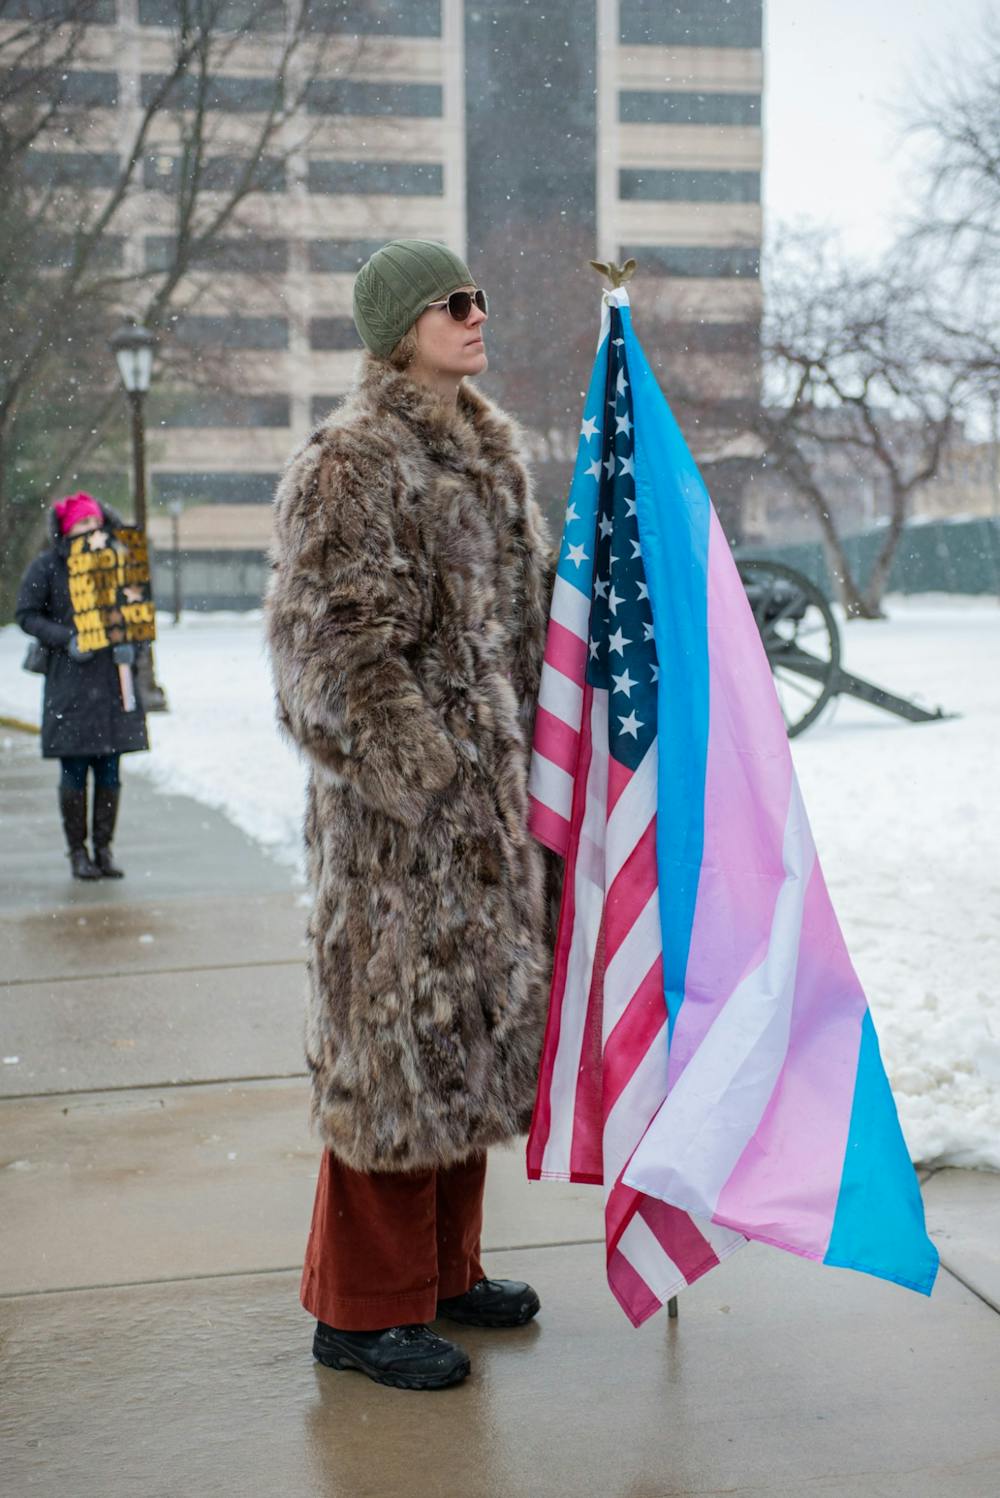 Micheala Hundersmarck supported women's rights her whole life when she was presenting as a man, but it wasn't until now that she has felt she "truly belongs here." Micheala stands in support of all women with her transgender and American flag during the Women’s March On Lansing 2020 Jan. 18, 2020, hosted by the Blue Brigade.